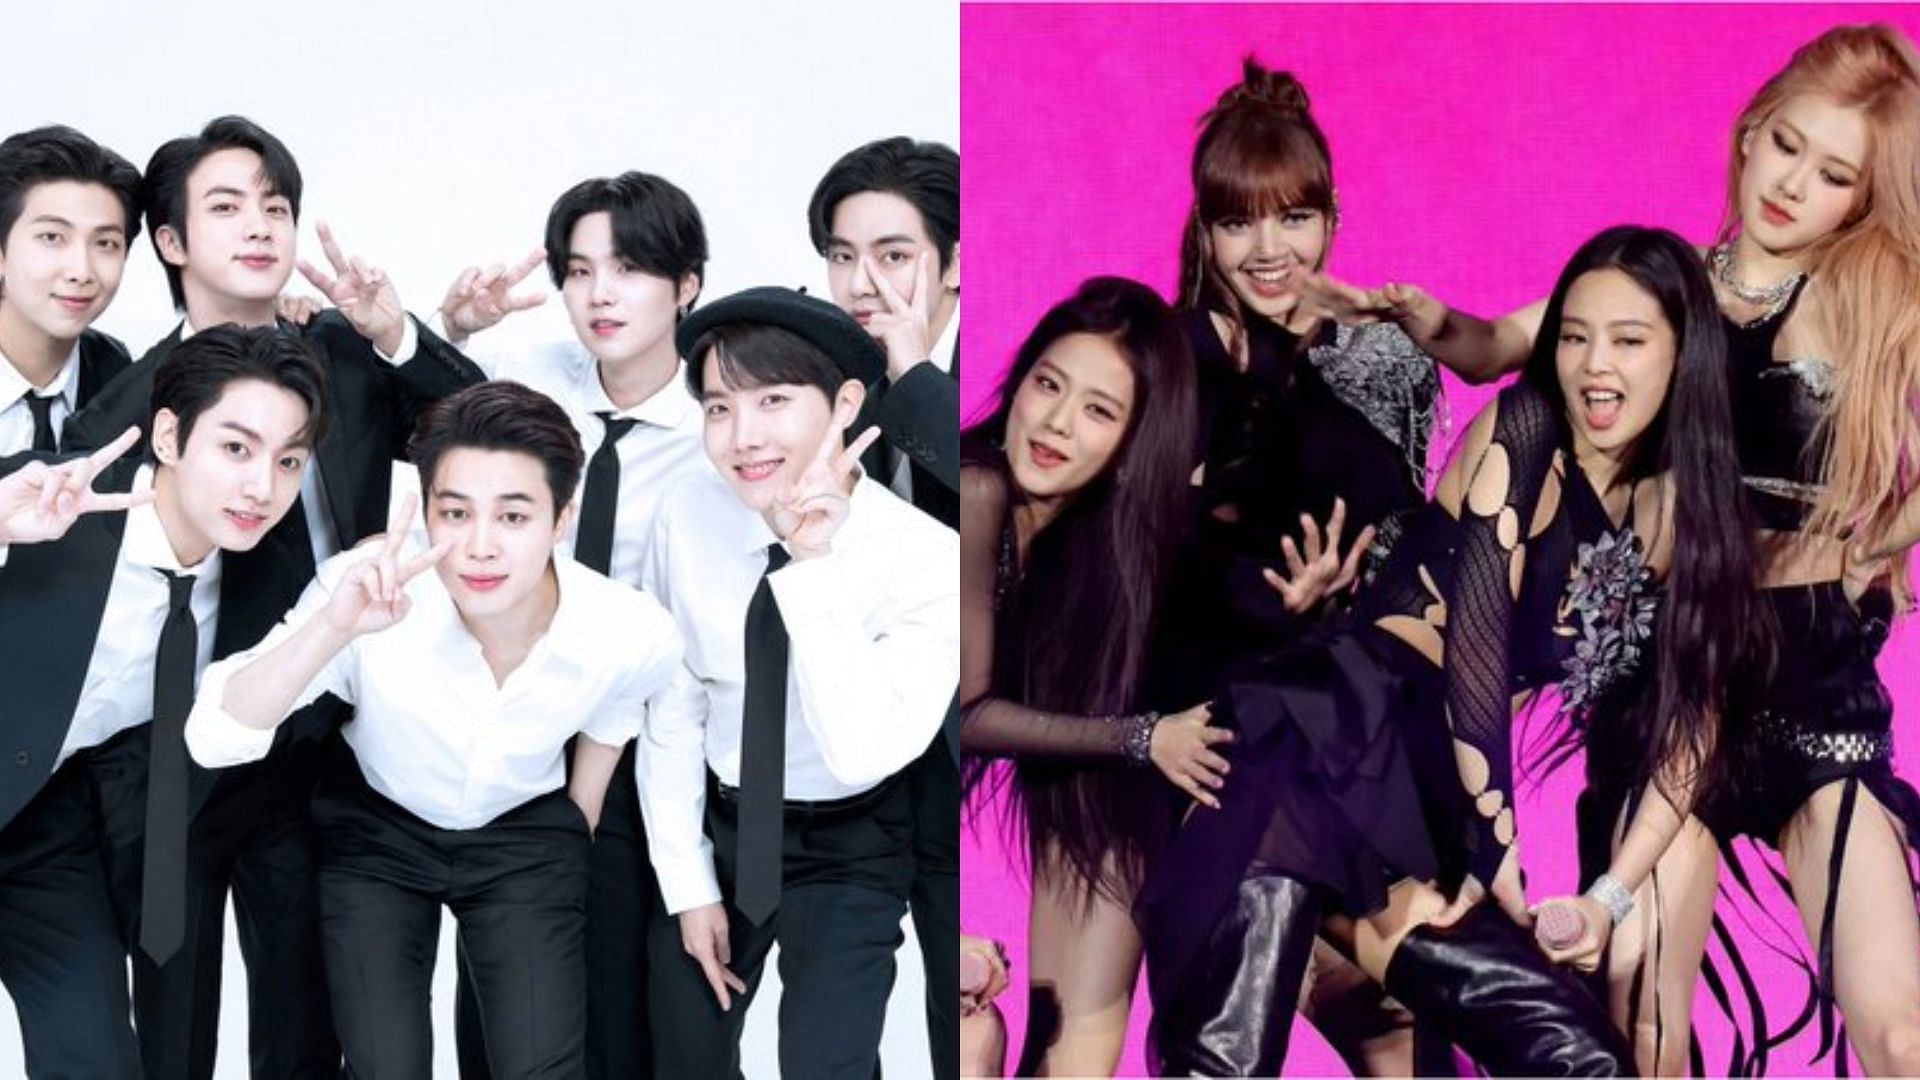 BTS and BLACKPINK rank in the top 2 for April Idol Group brand reputation rankings (Image via Twitter/@annchachana)